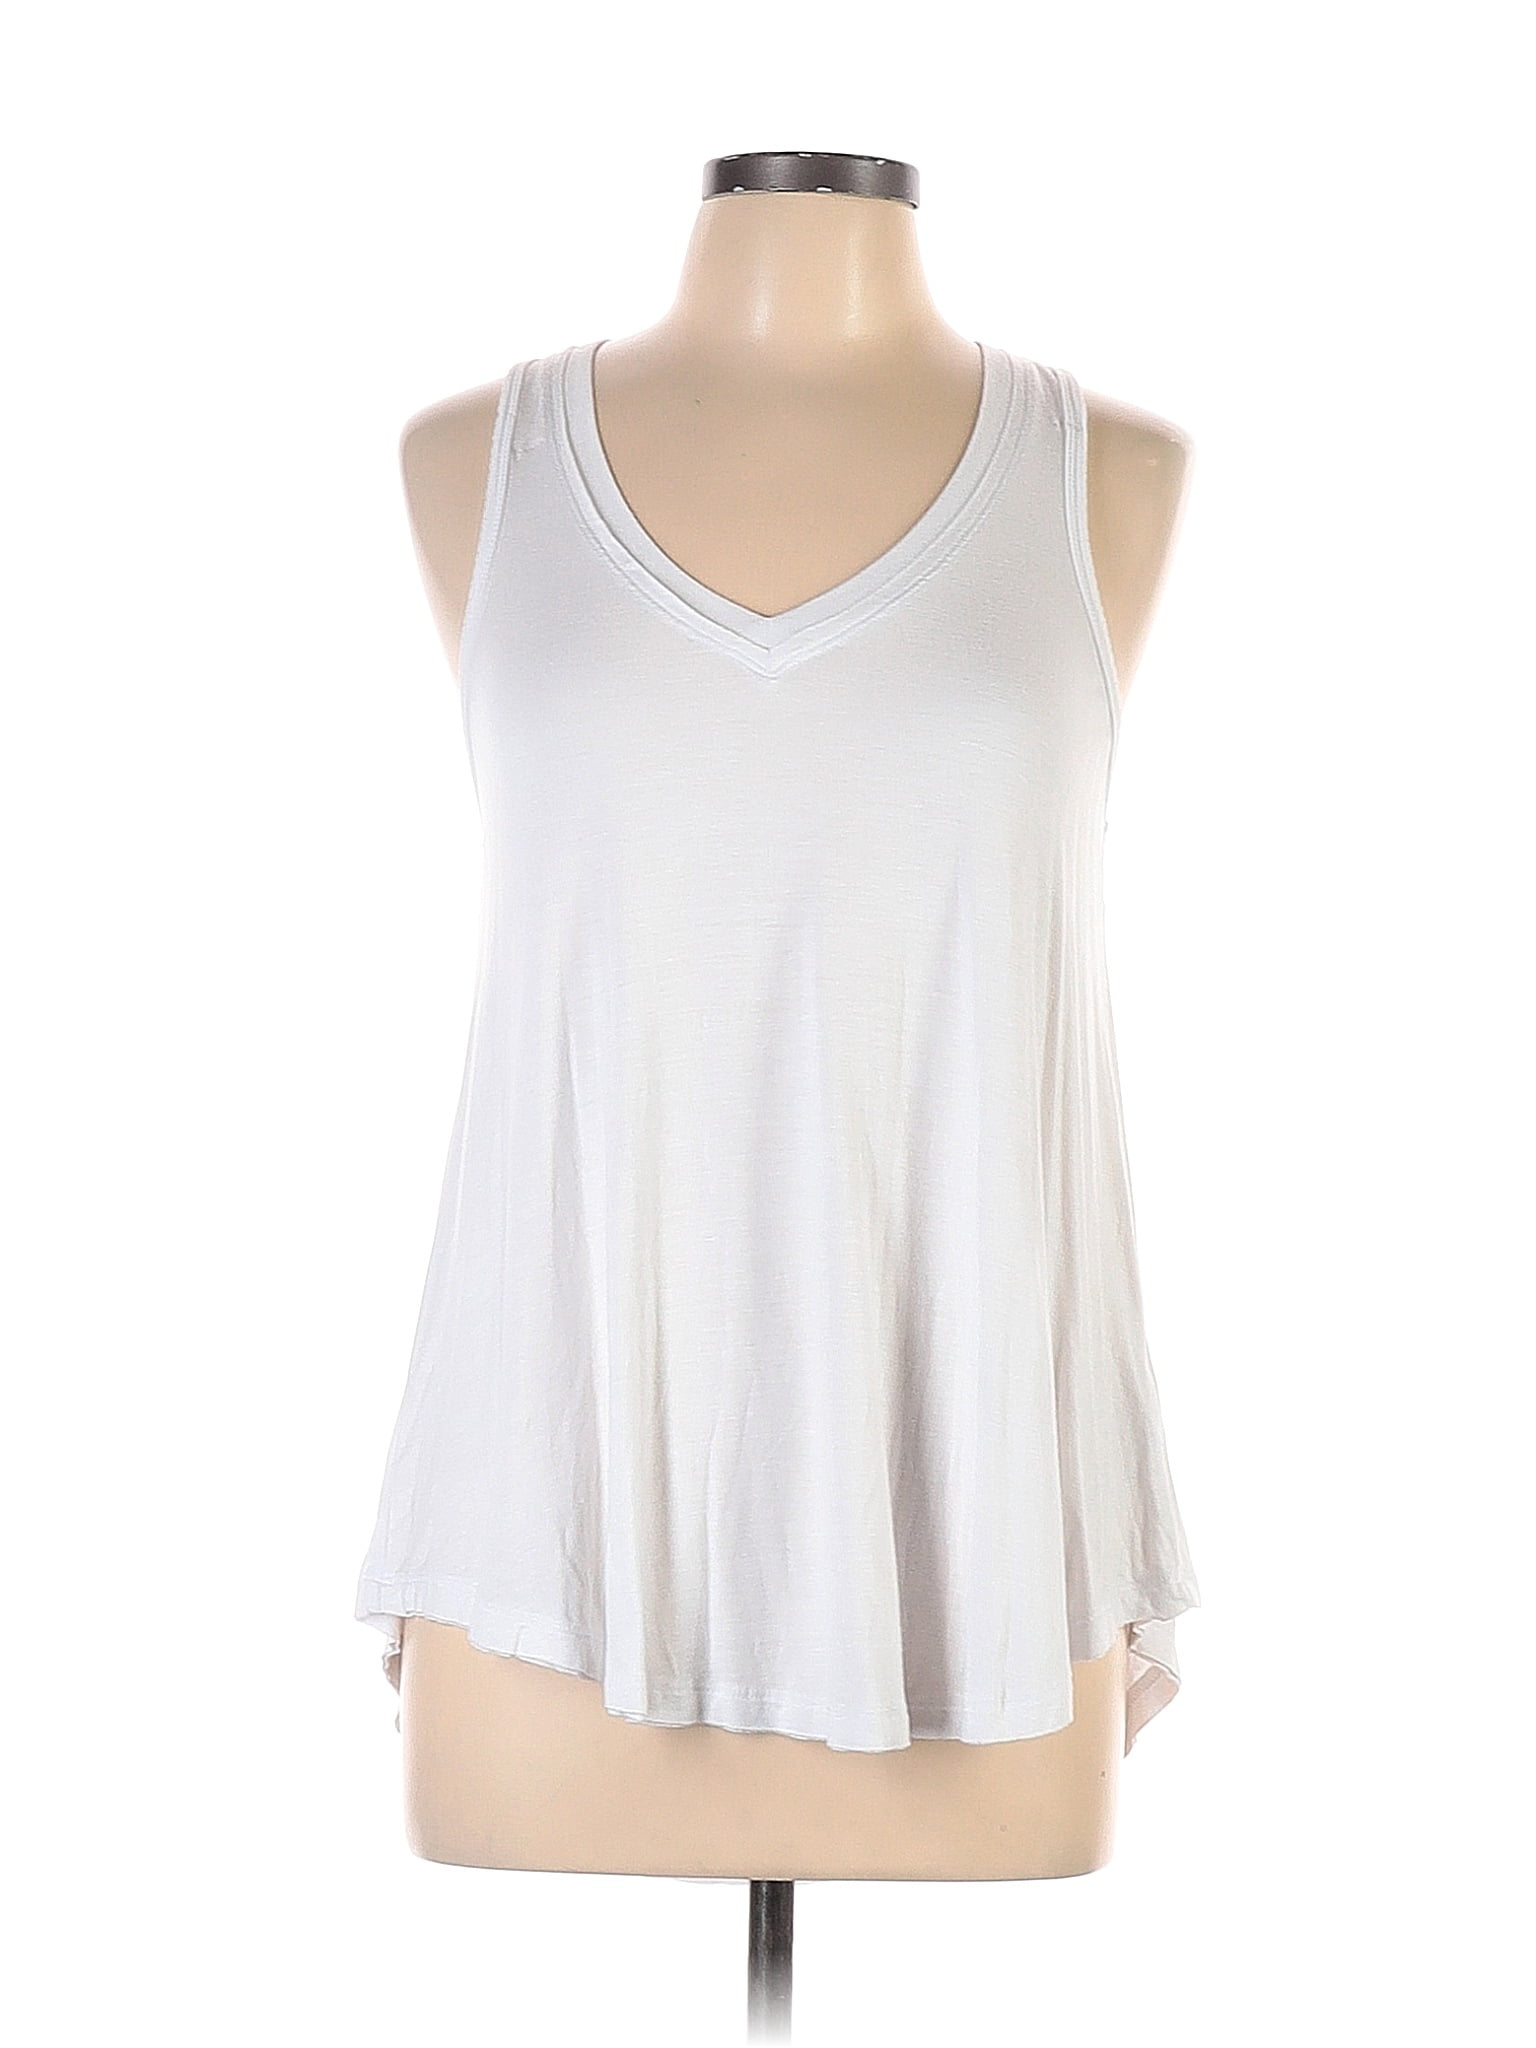 Z Supply Solid White Tank Top Size L - 53% off | thredUP